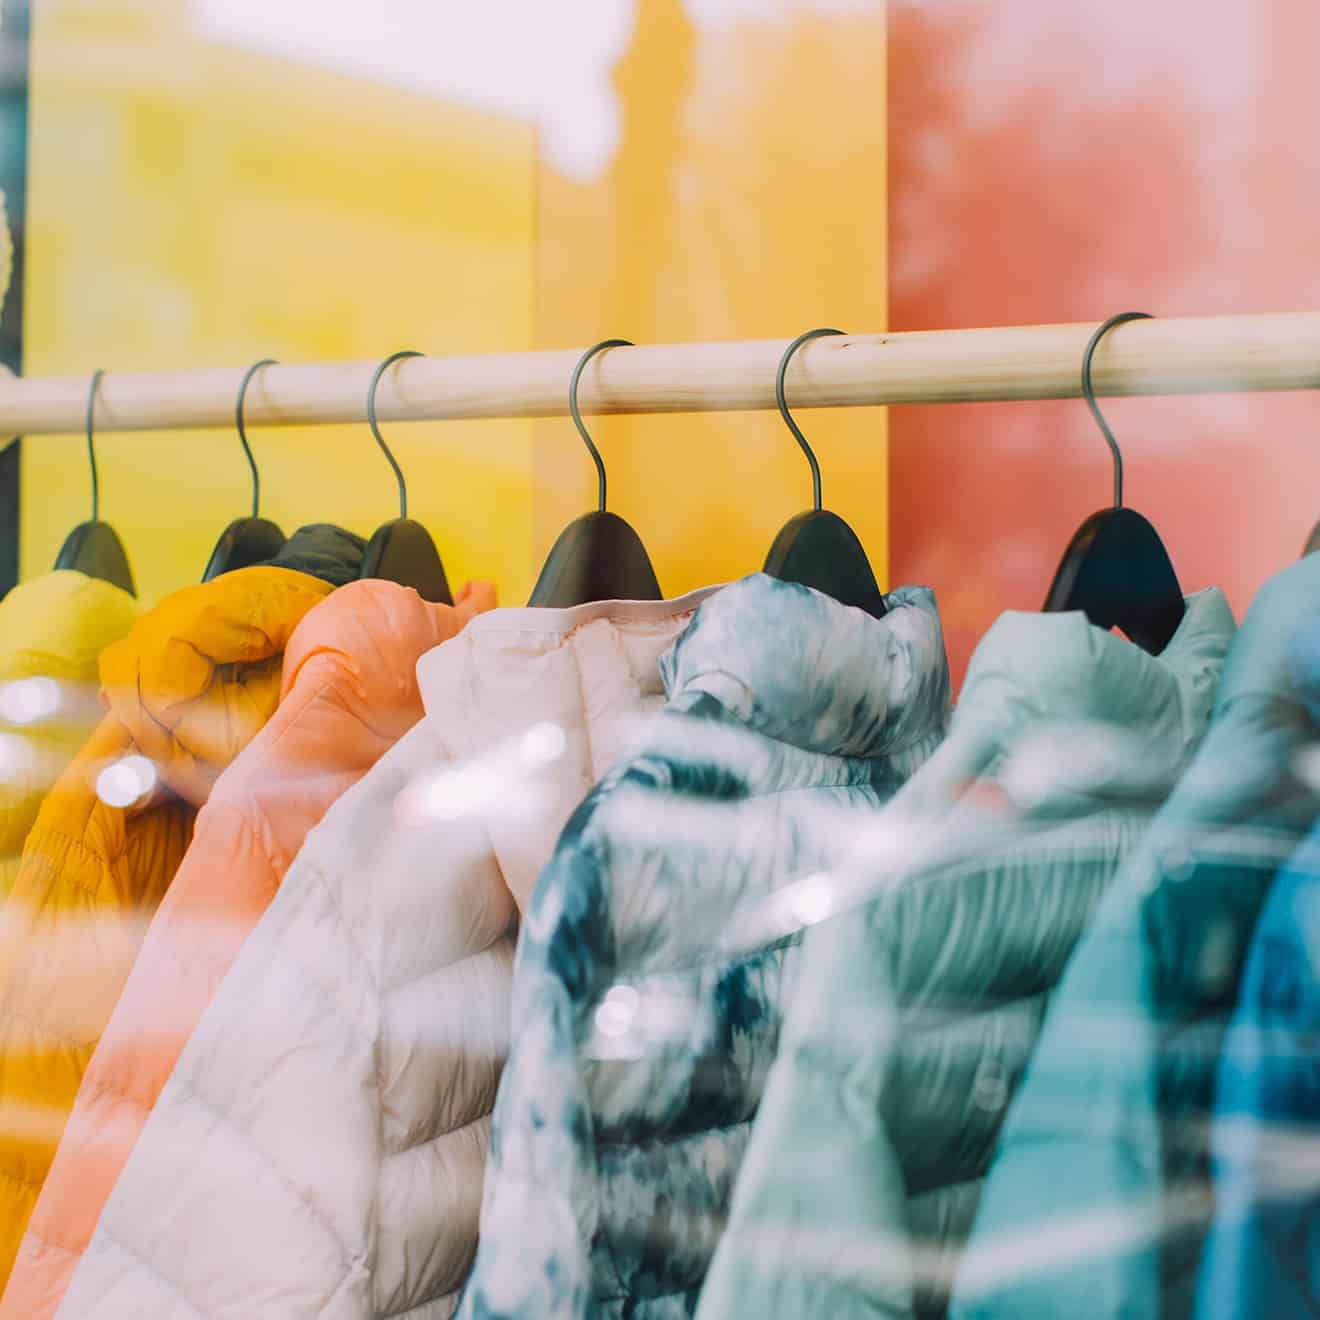 5 Challenges for HR in the Retail Industry